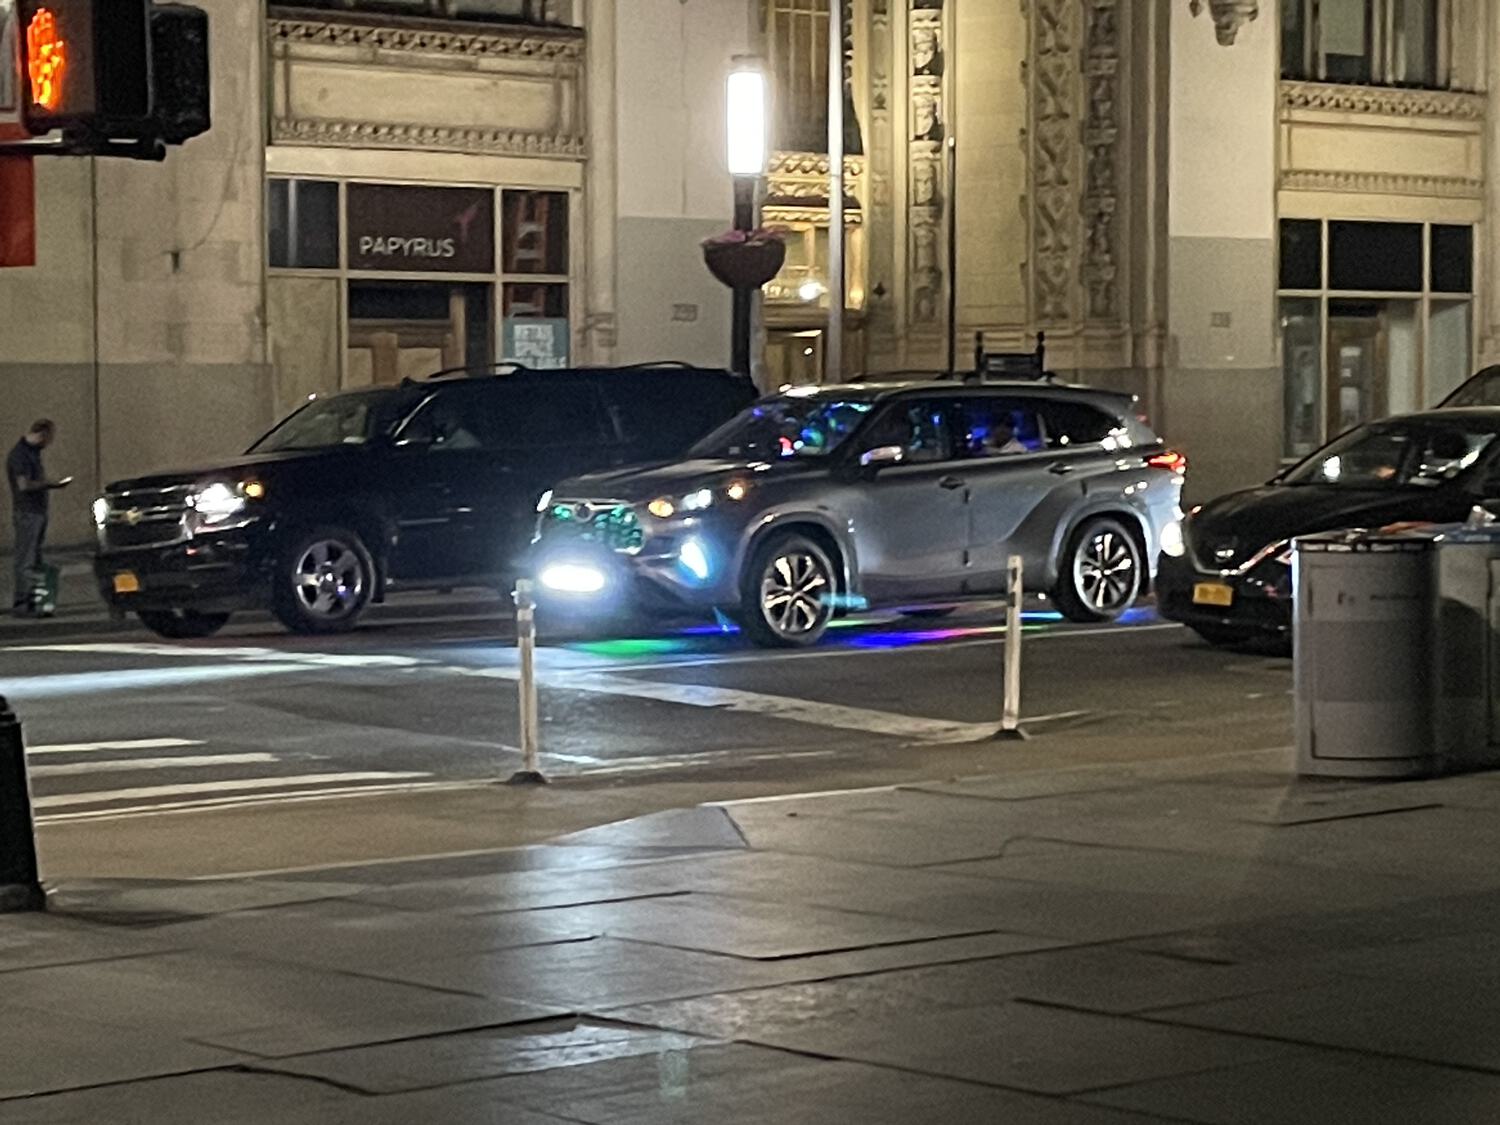 A zoomed-in shot of a car stopped at a red light. There are colorful party lights inside the car, as well as illuminating its grill and the road beneath it.